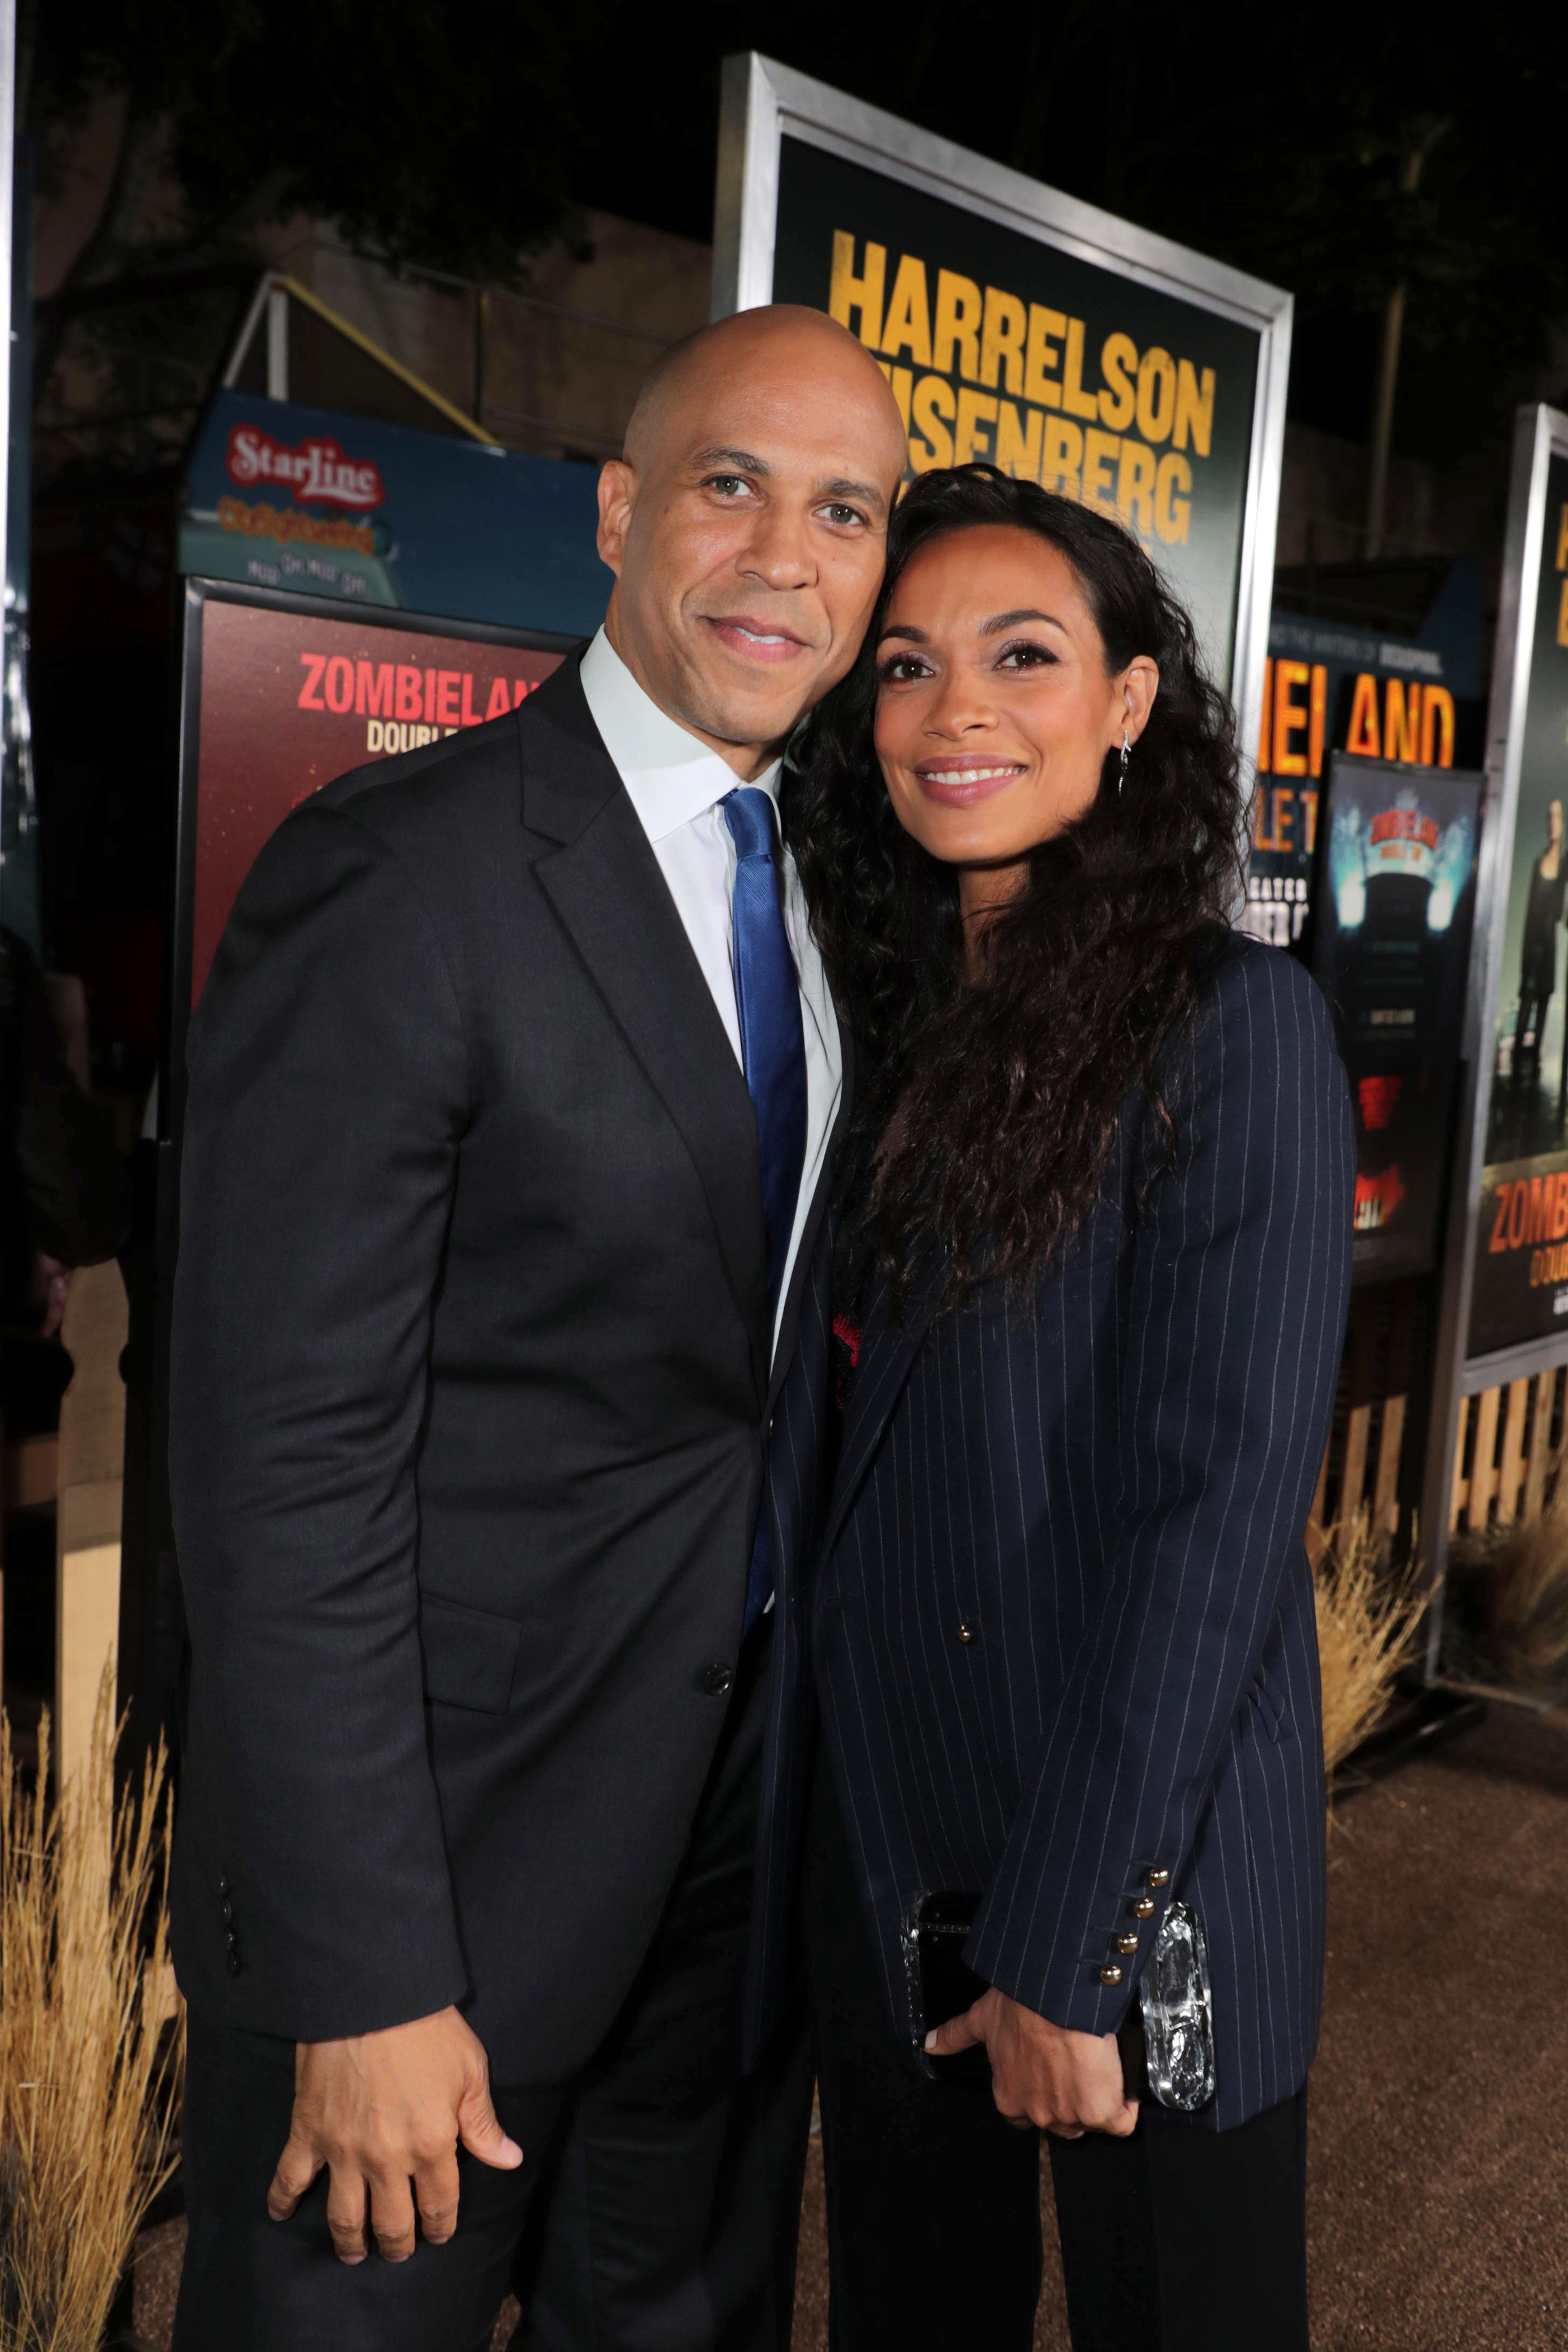 <p>Actress <a href="https://www.wonderwall.com/celebrity/profiles/overview/rosario-dawson-558.article">Rosario Dawson</a> began dating Democratic politician Cory Booker -- who is 10 years her senior -- in 2018 when she was 39 and he was 49. They split in 2021.</p>